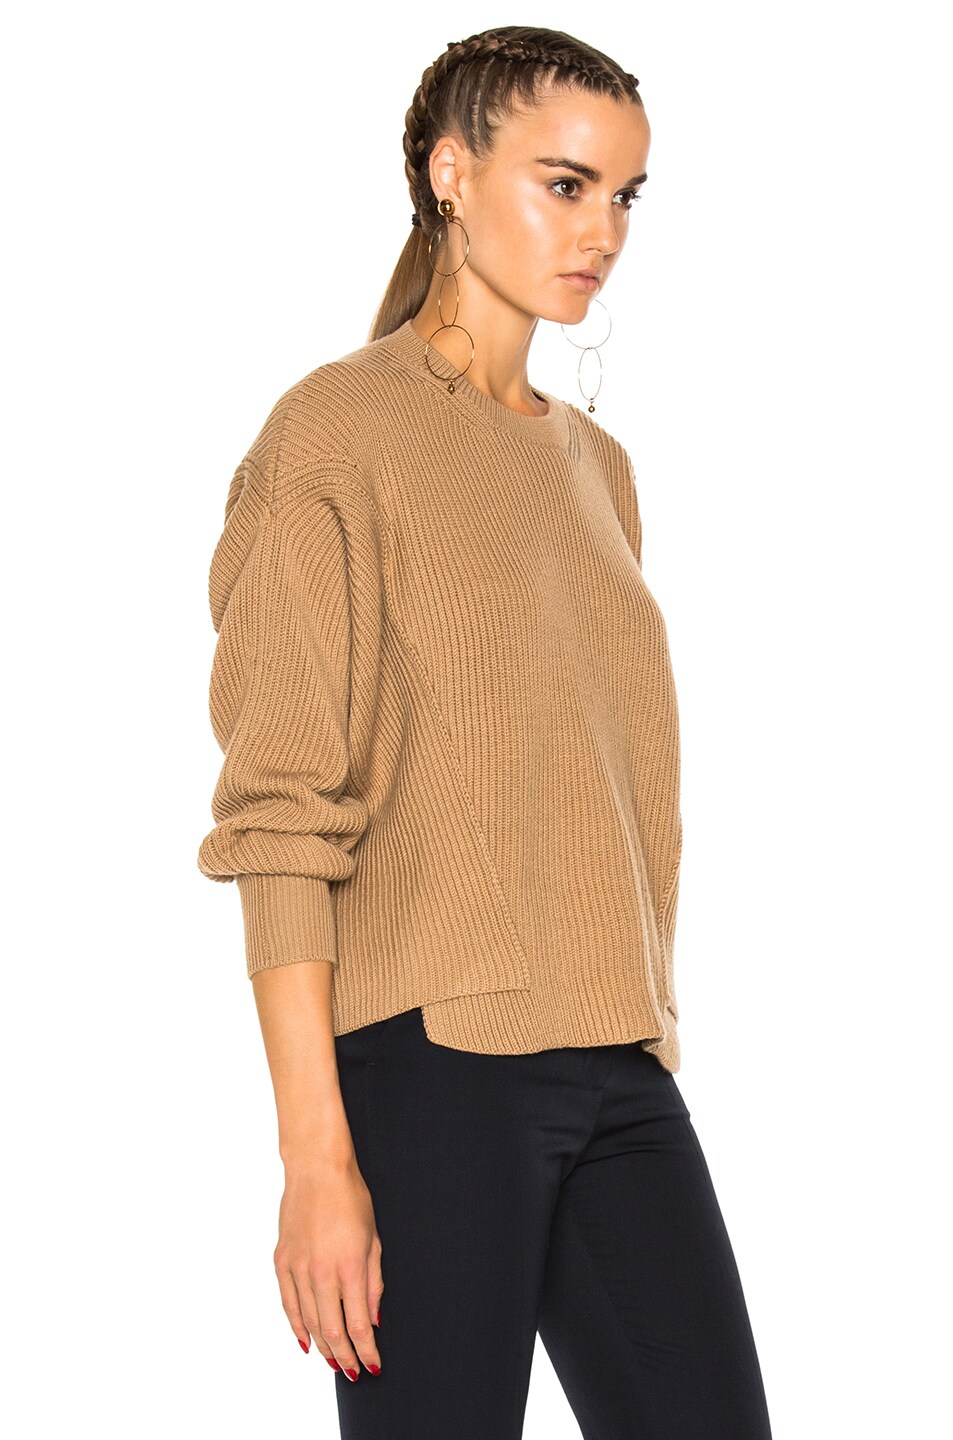 STELLA MCCARTNEY Ribbed Crew Neck Sweater in Sable | ModeSens